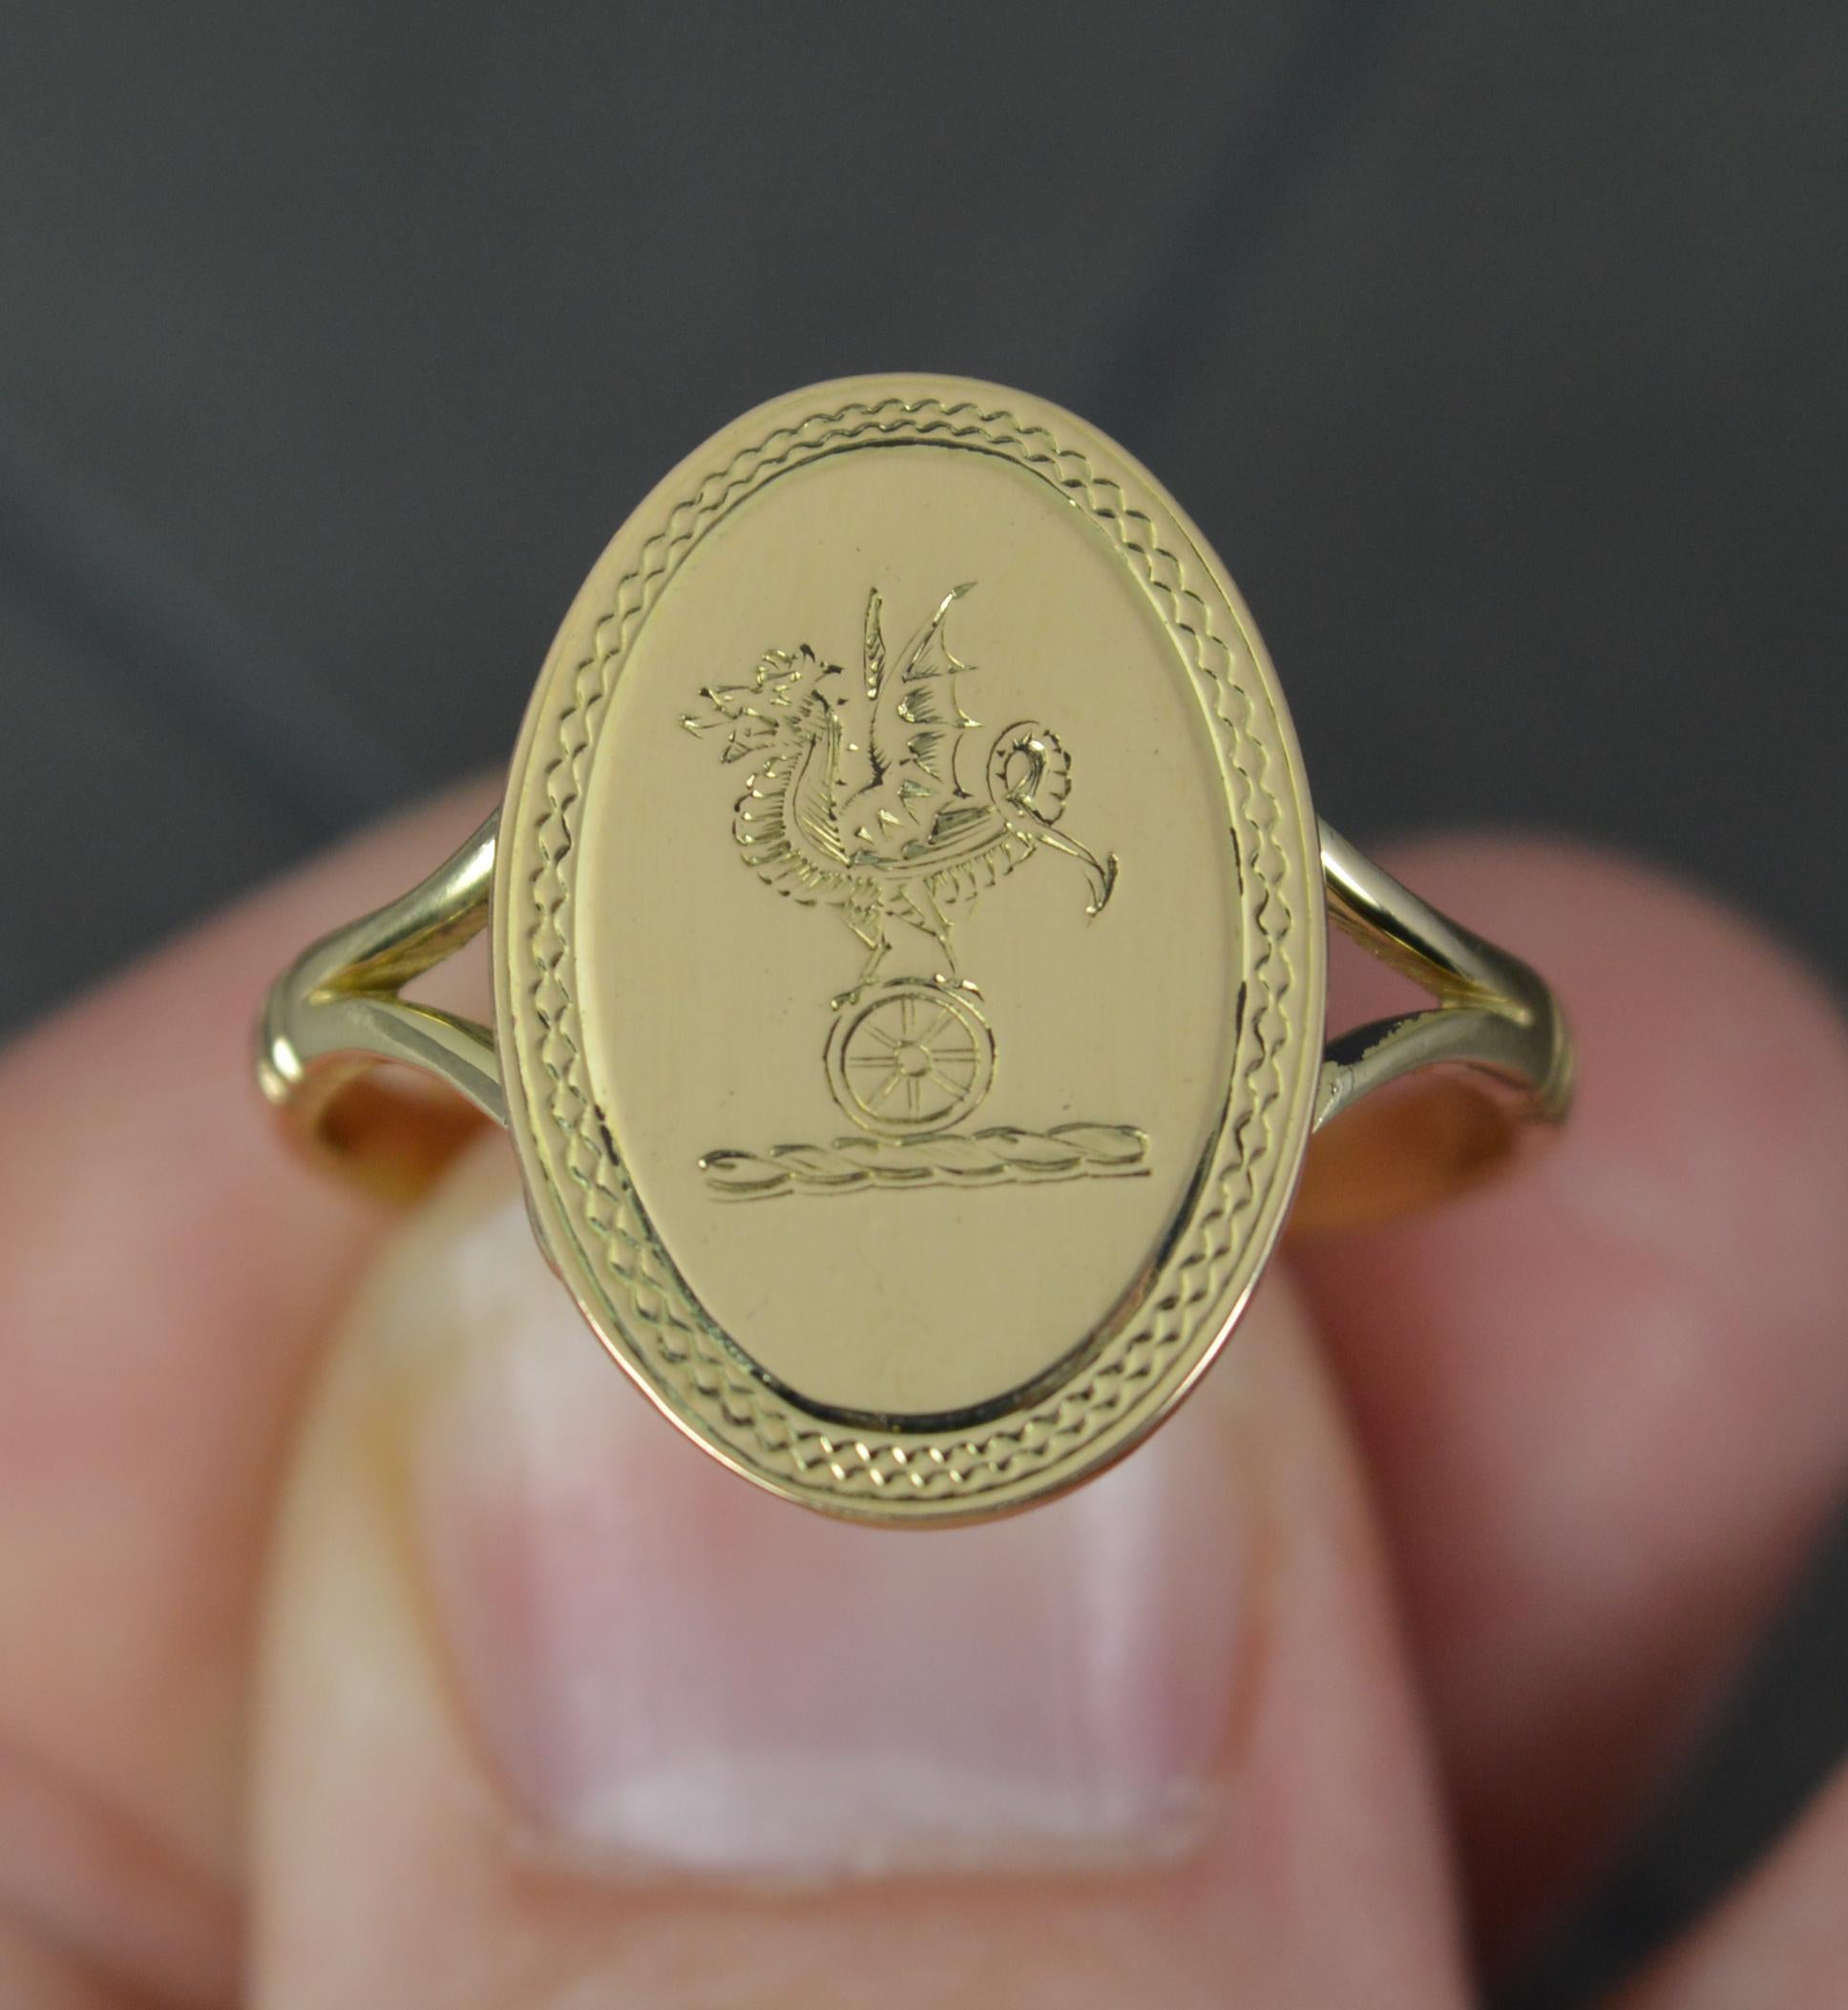 Edwardian 18 Carat Gold Dragon Engraved Signet Ring In Excellent Condition For Sale In St Helens, GB